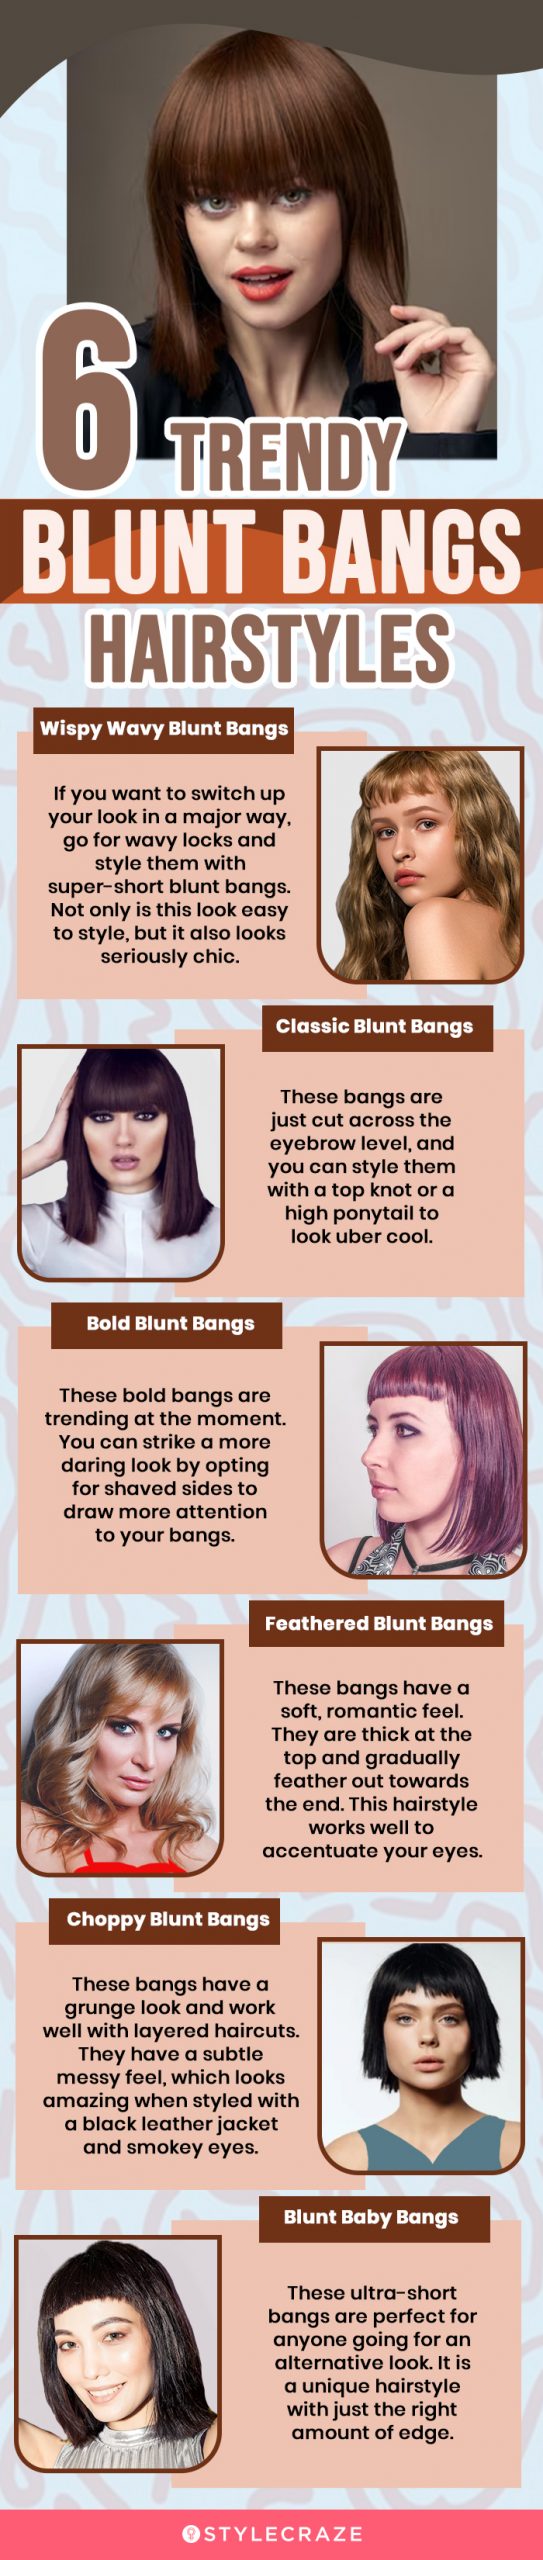 6 trendy blunt bangs hairstyles (infographic)